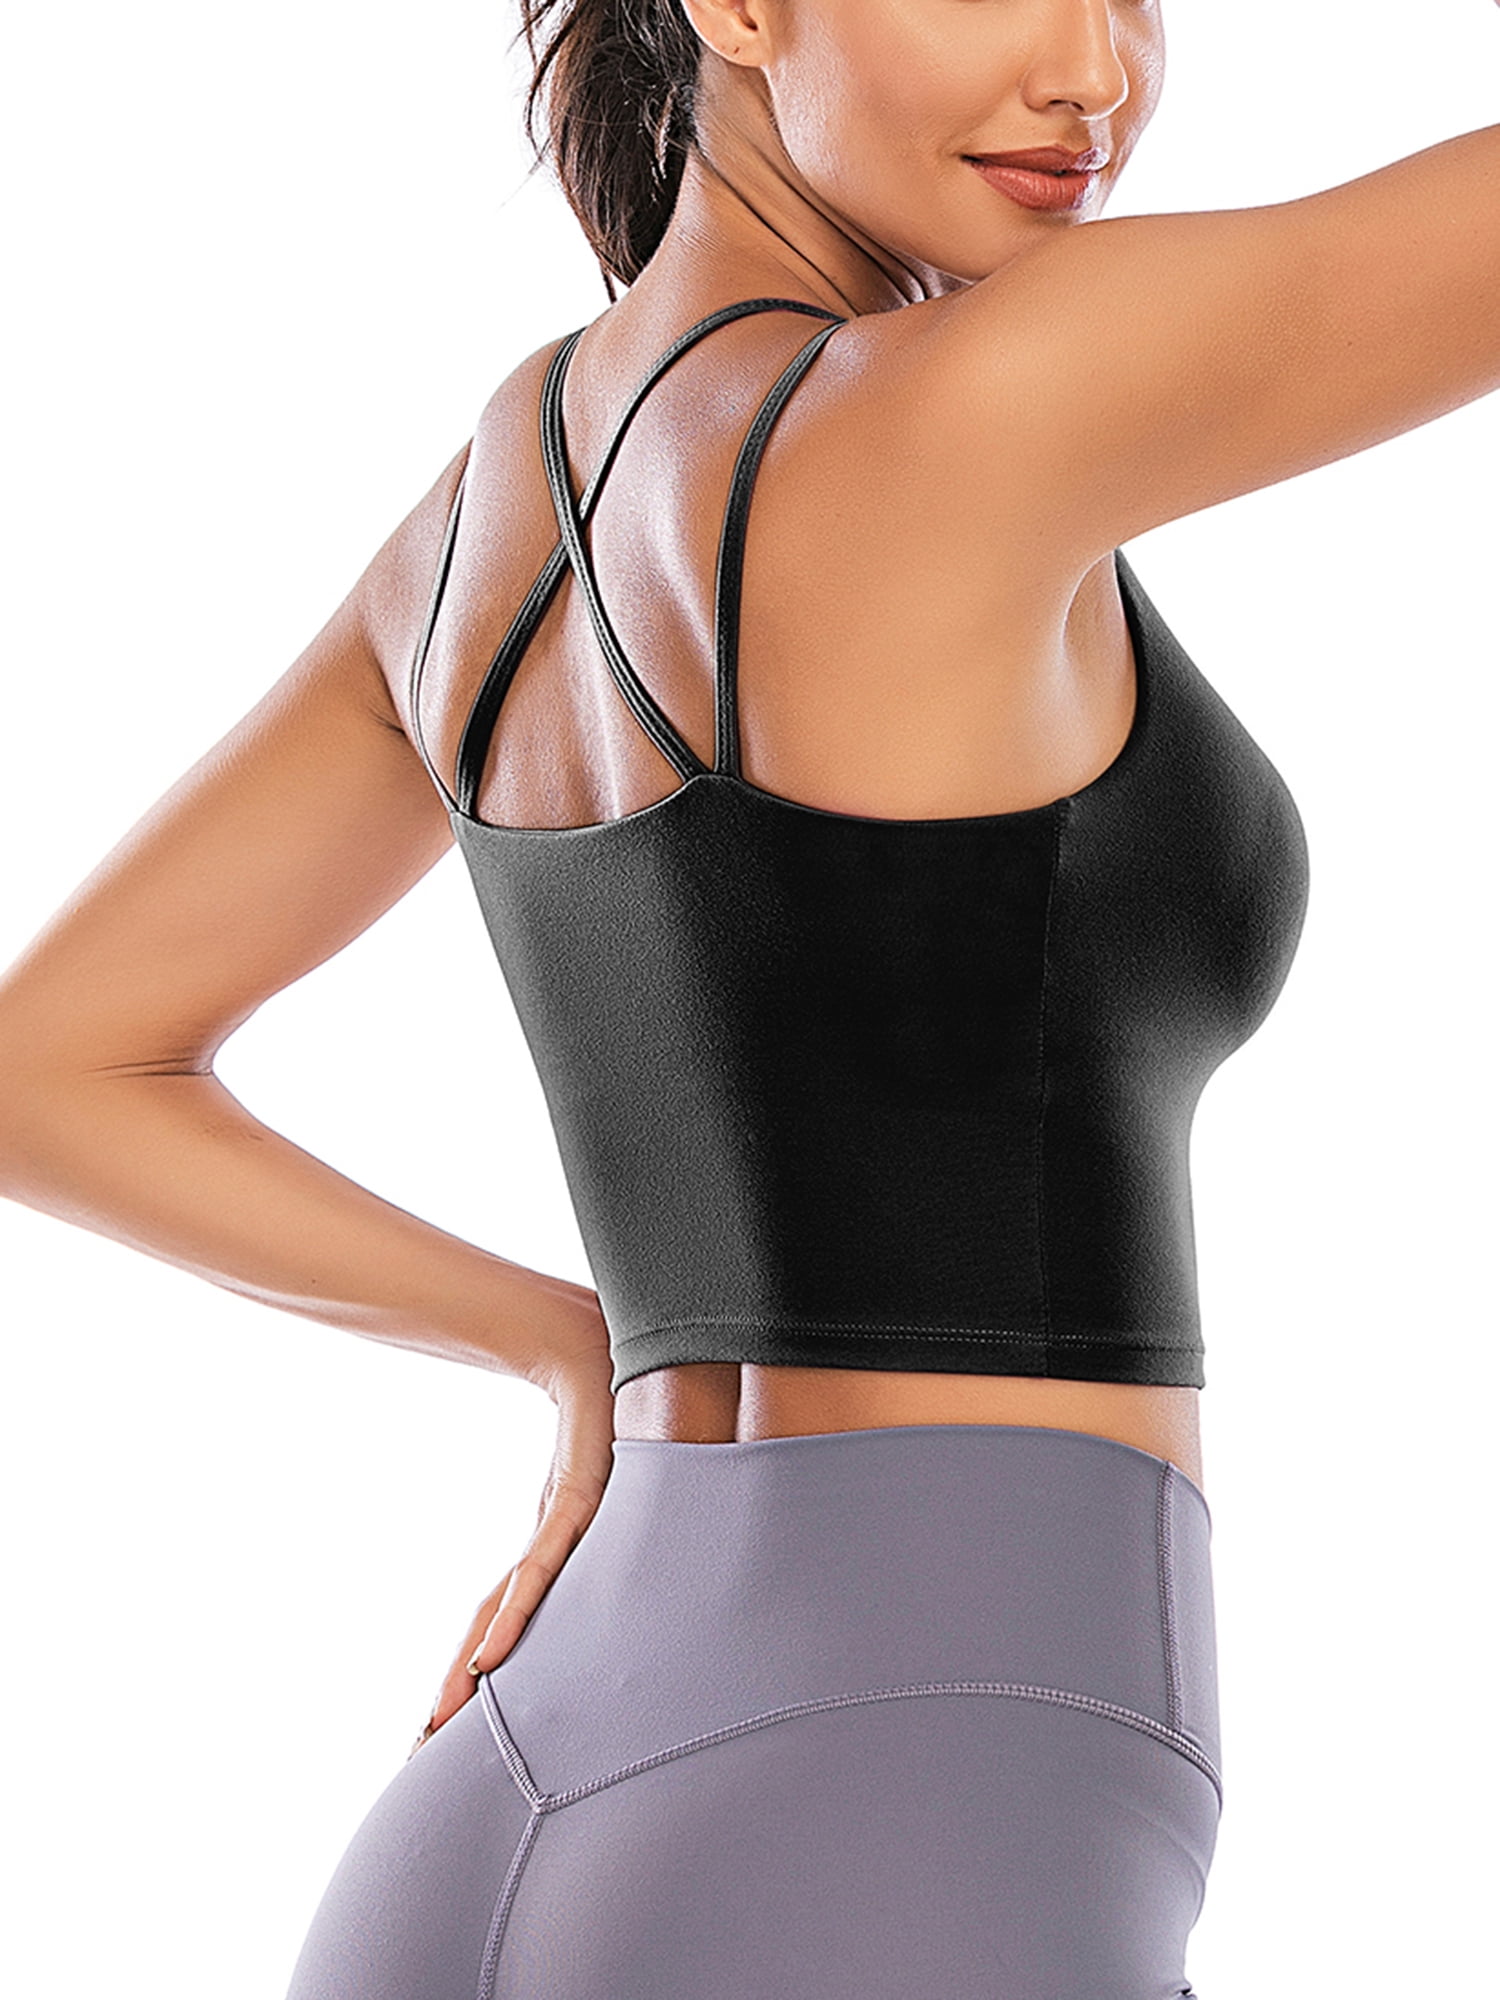 Youloveit Workout Tank Tops for Women with Built in Sports Bra Strappy  Camisole Yoga Longline Sports Bras Athletic Tops at  Women's Clothing  store